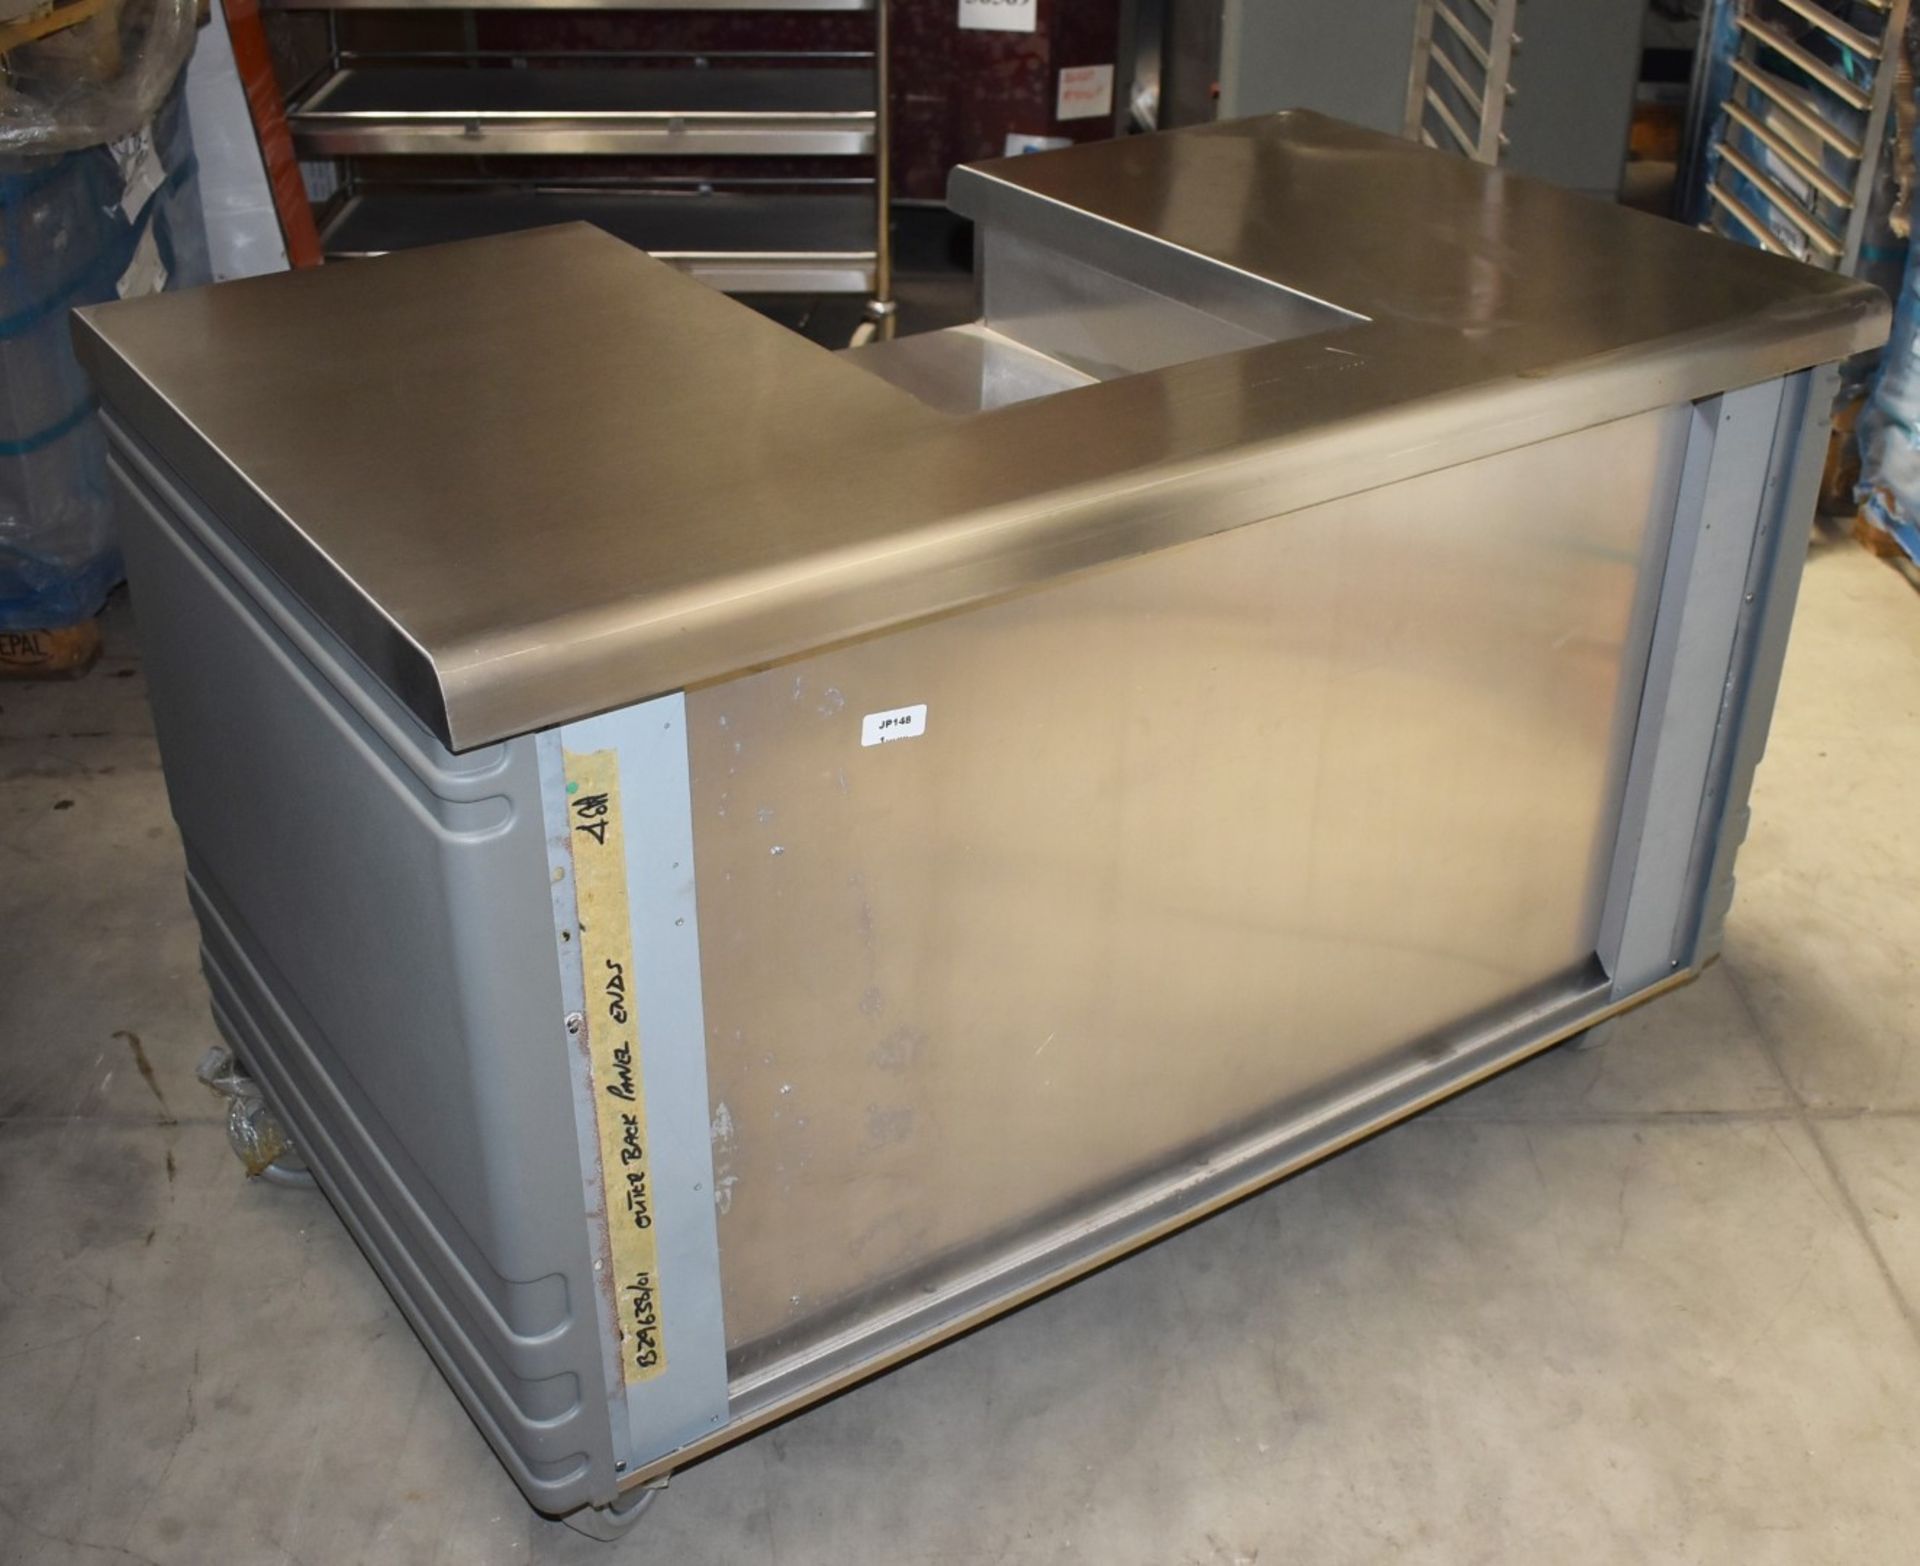 1 x Grundy Commercial Mobile Servery Unit With Stainless Steel Top Featuring Insert For Appliance or - Image 8 of 12